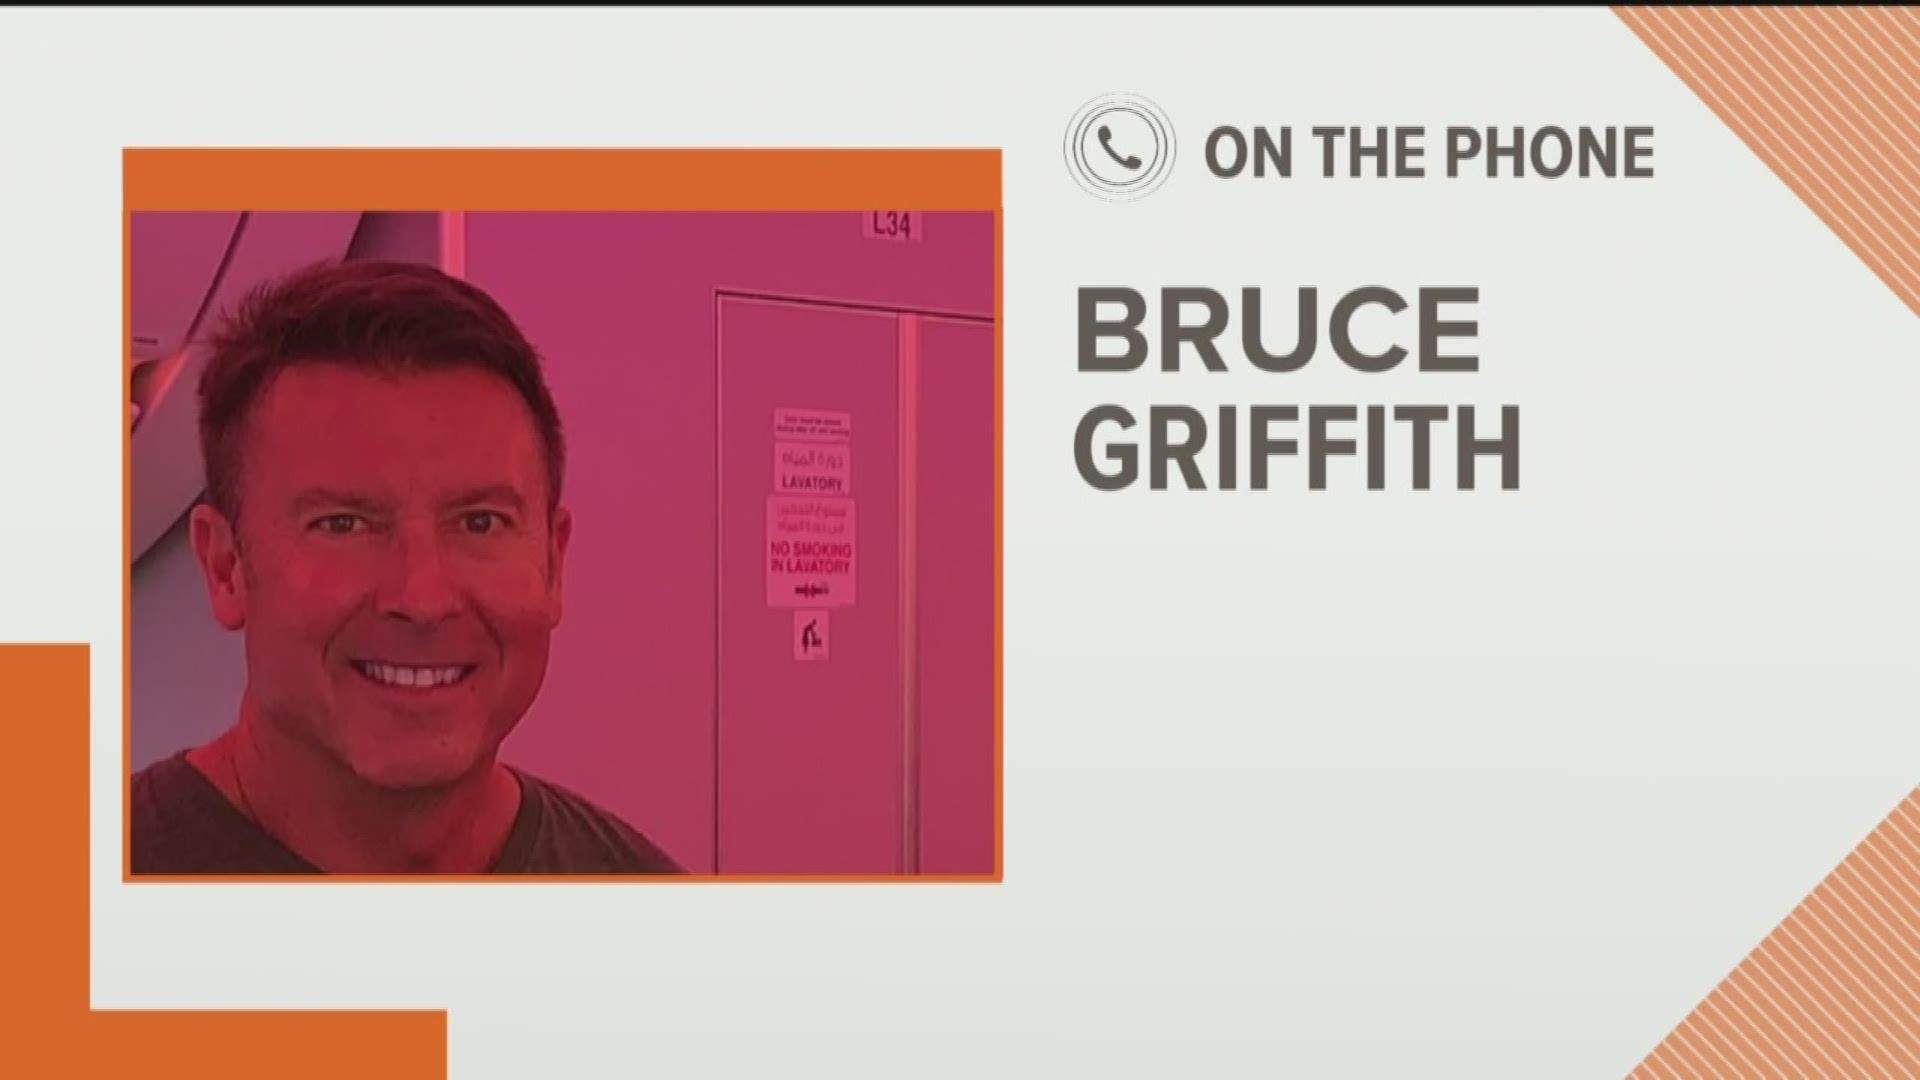 Bruce Griffith is there with three other friends.